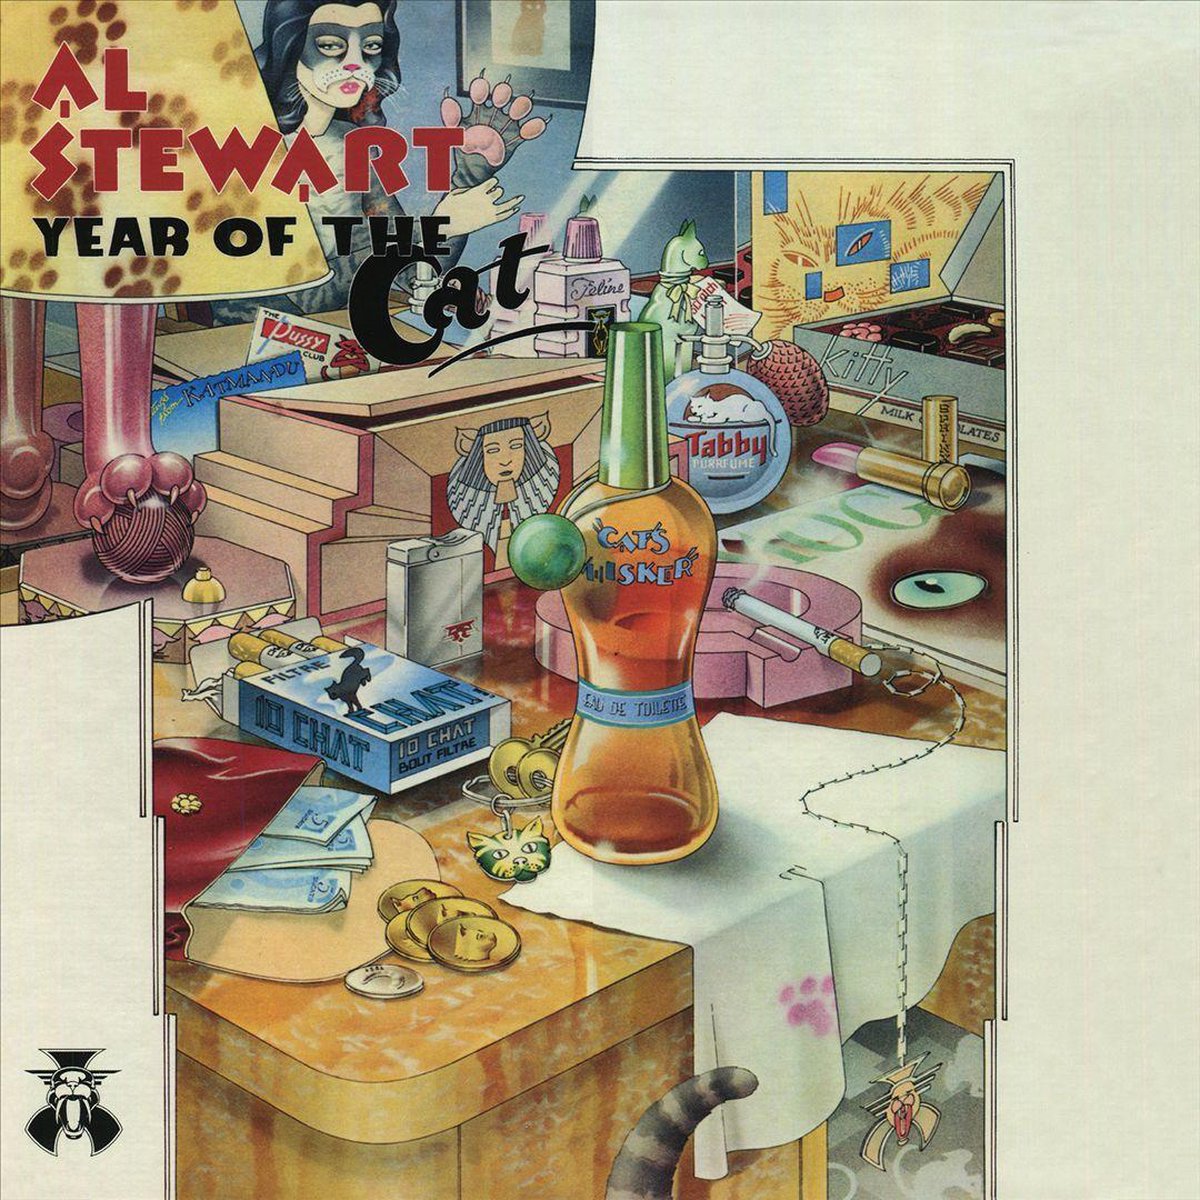 Year Of The Cat (45th Anniversary Deluxe Edition), Al Stewart 